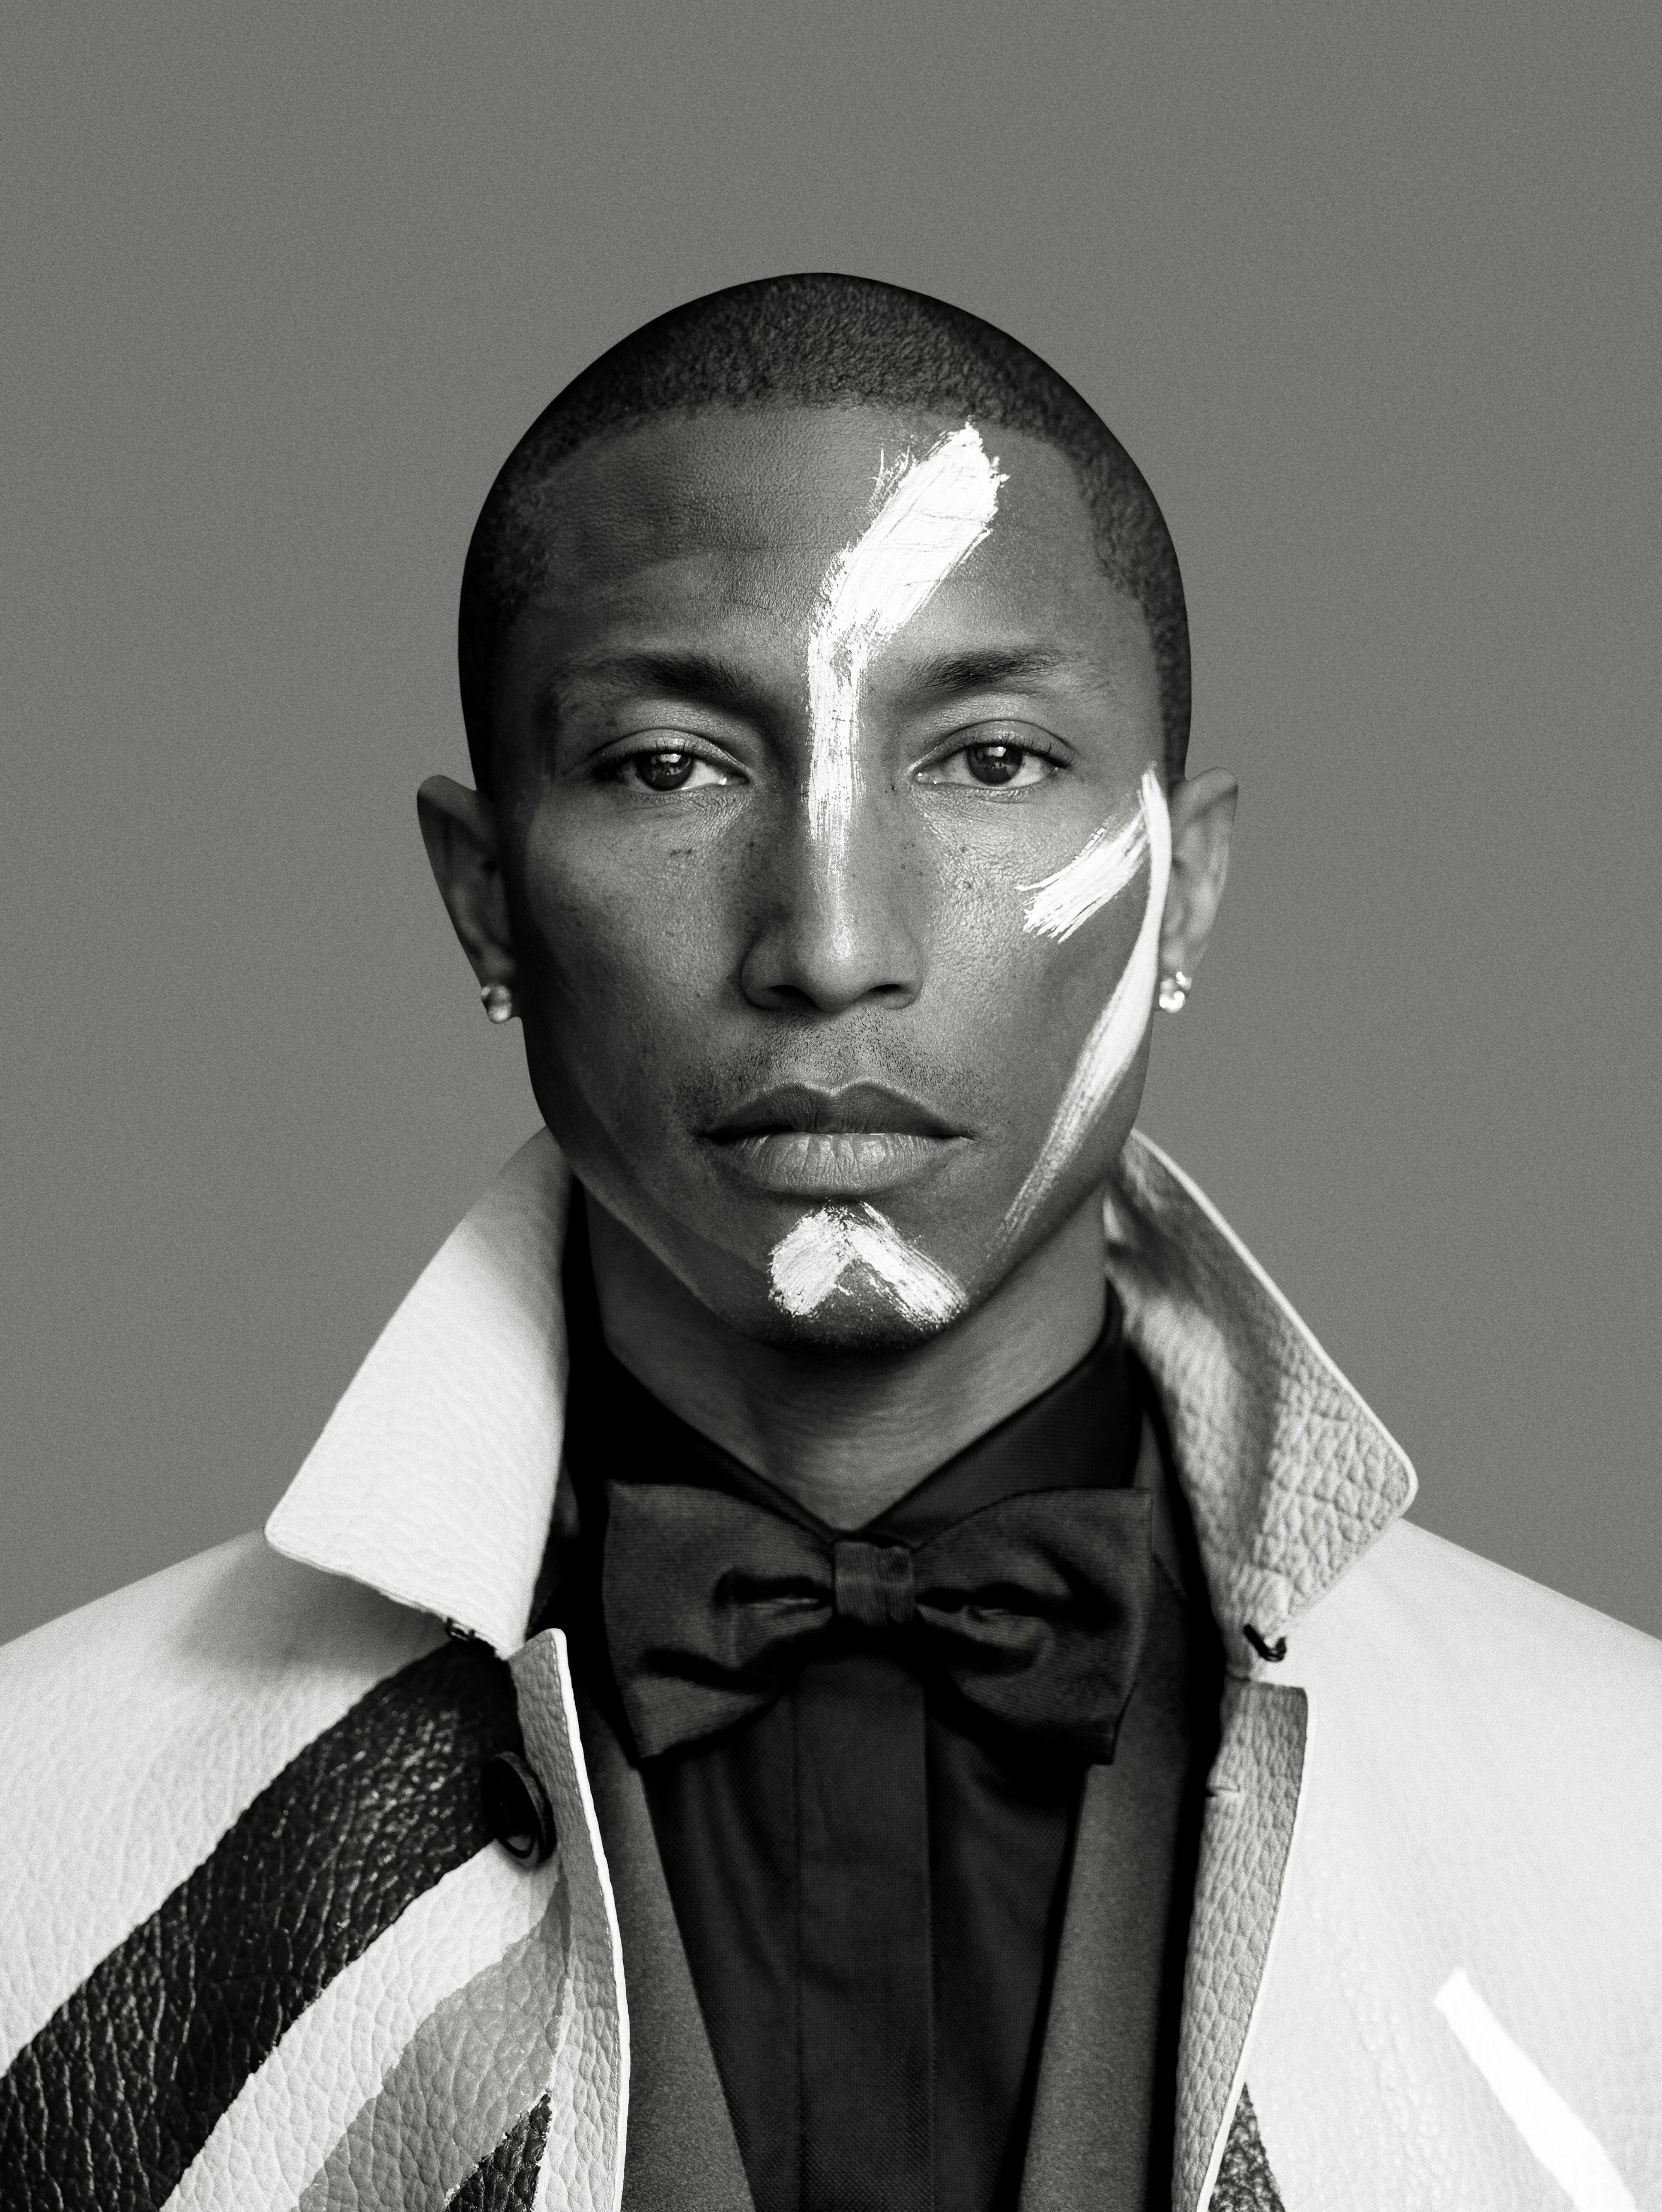 Hunter & Gatti Black and White Photograph - Pharrell Williams, Photography on canvas. Mounted on a stretcher